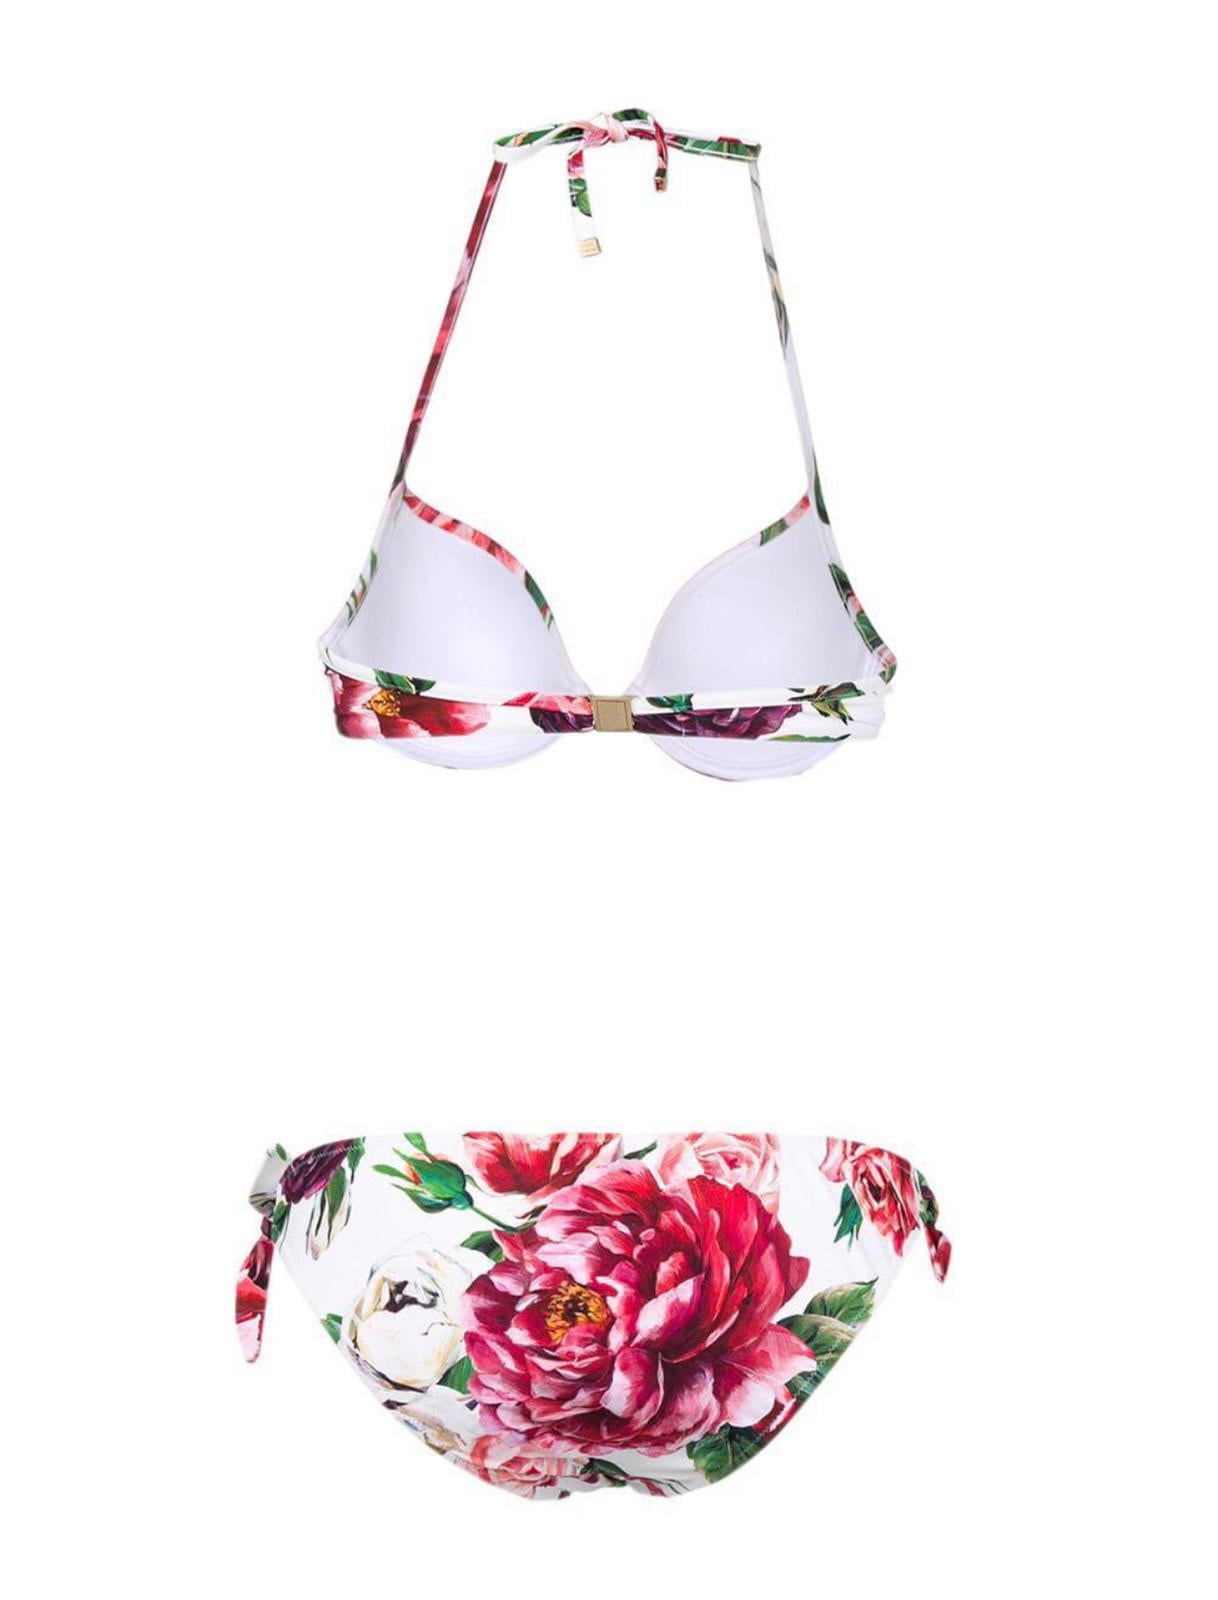 Dolce & Gabbana beachwear bikini set in PEONY brightly-colored print is the absolute star of this bikini that features a padded triangle bikini top with ties and thong bikini bottoms with adjustable bows in fine luxury fabric: 
Adjustable triangle